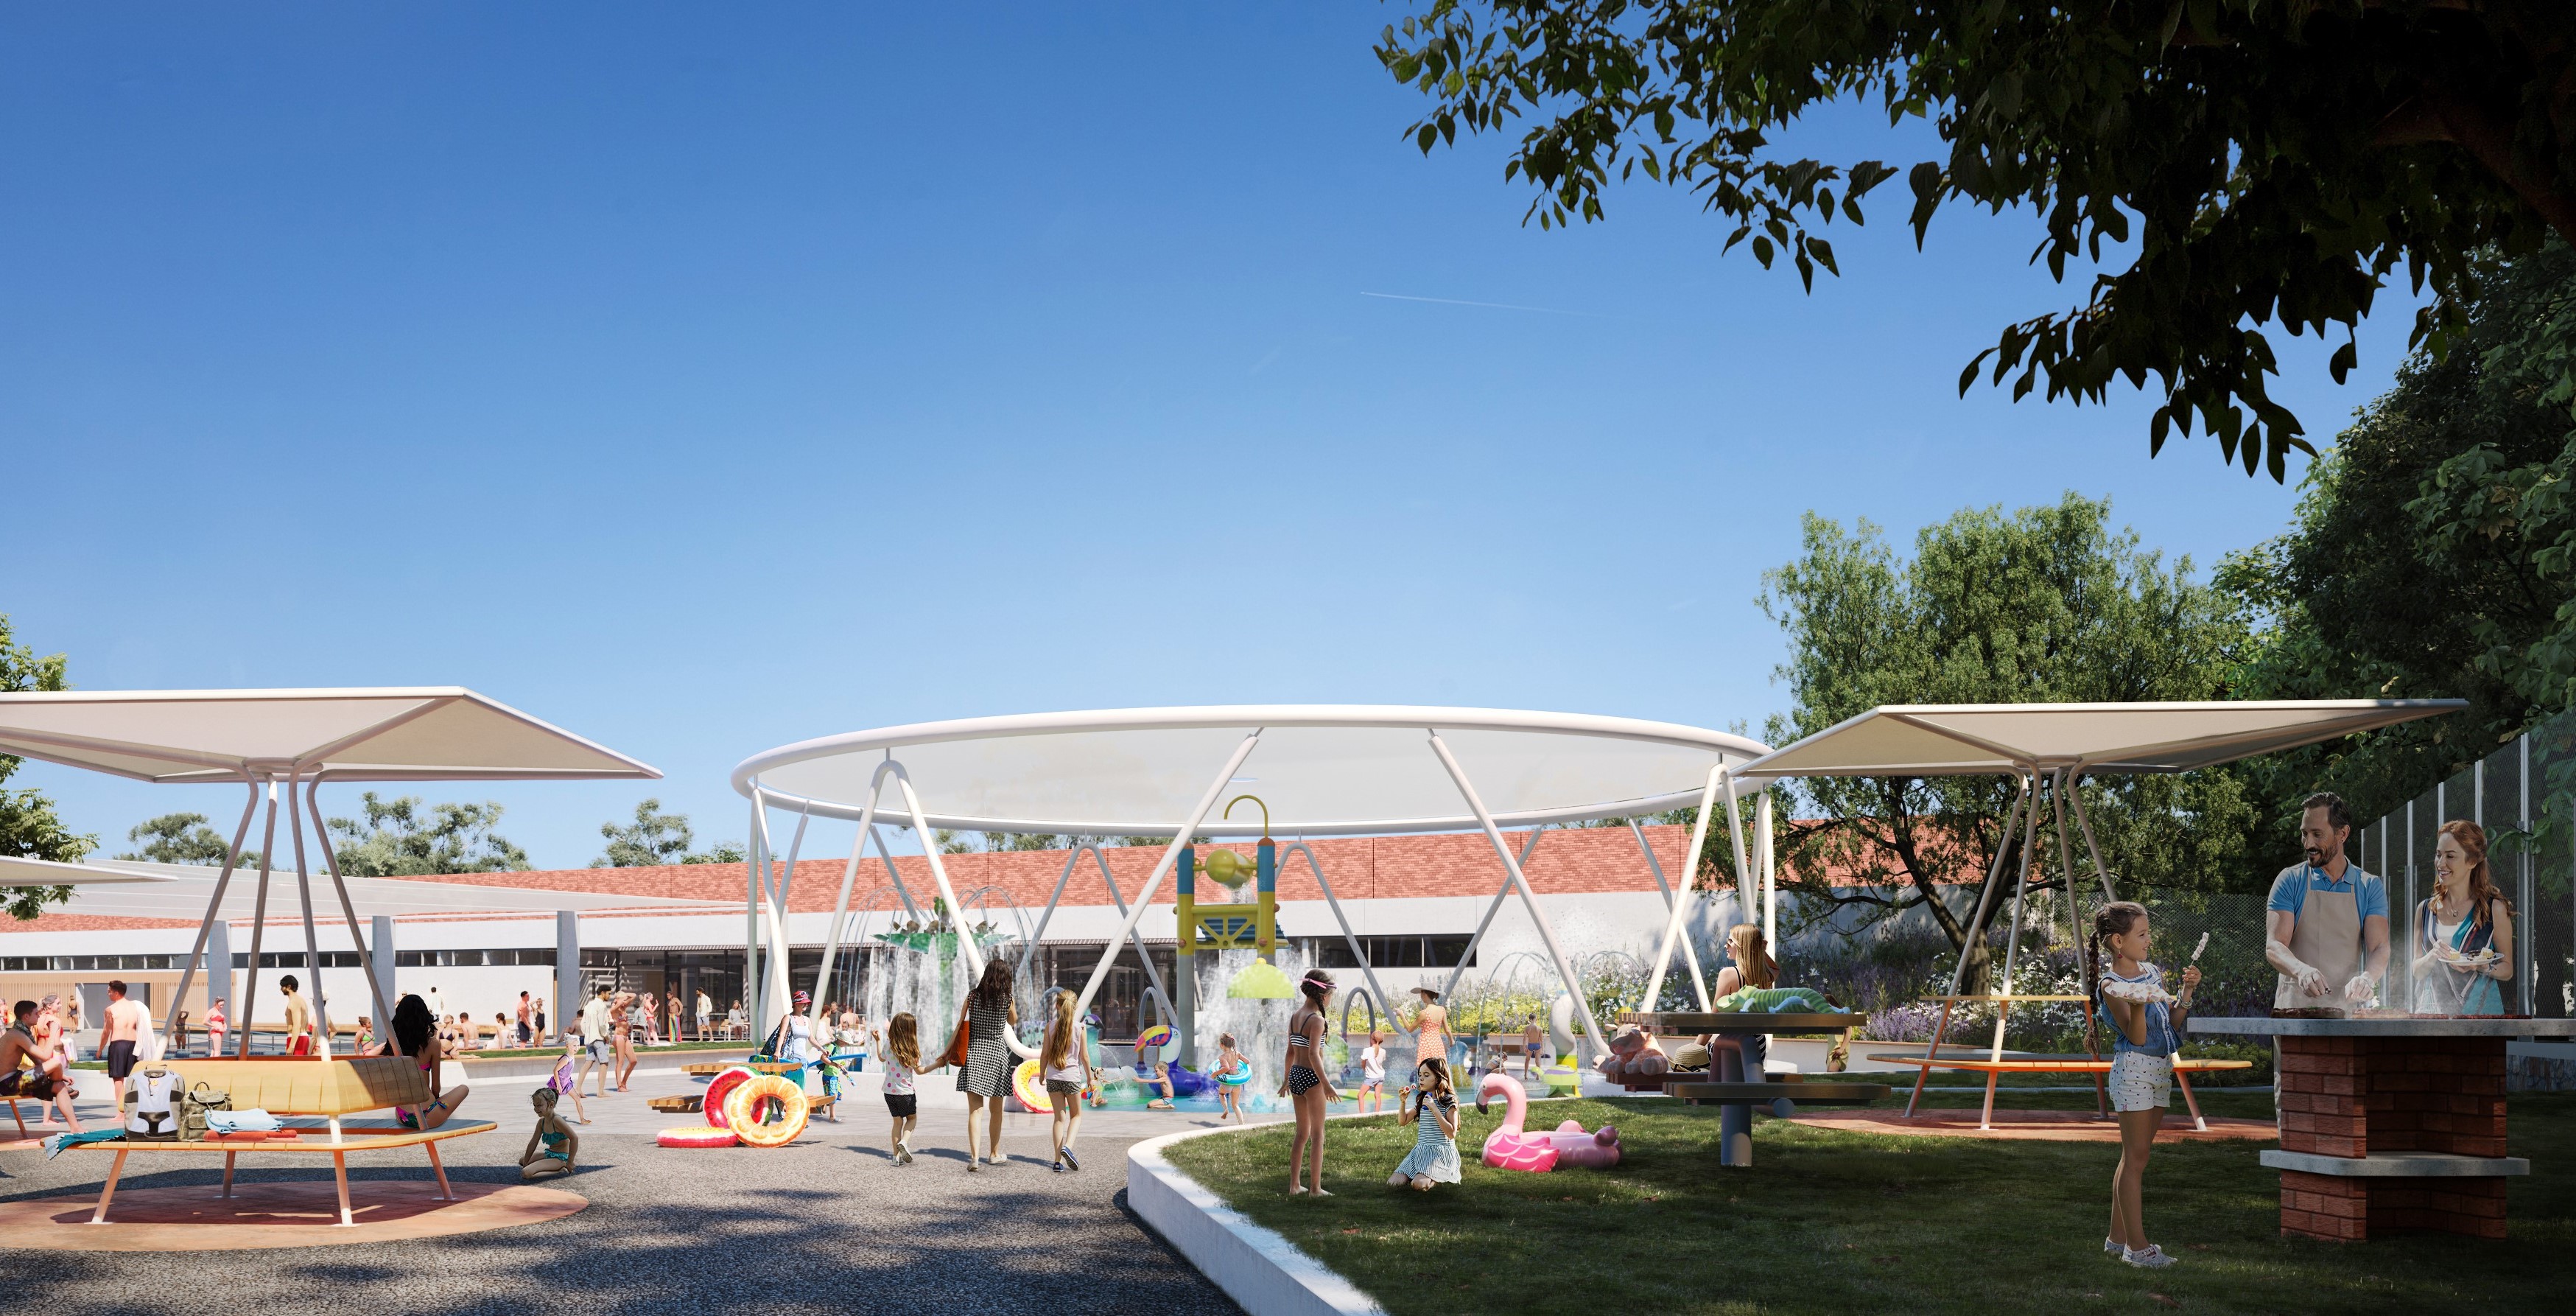 Artist rendering of Carnegie Swim Centre showing people gathering under shade structures enjoying the waterplay area nad having a BBQ